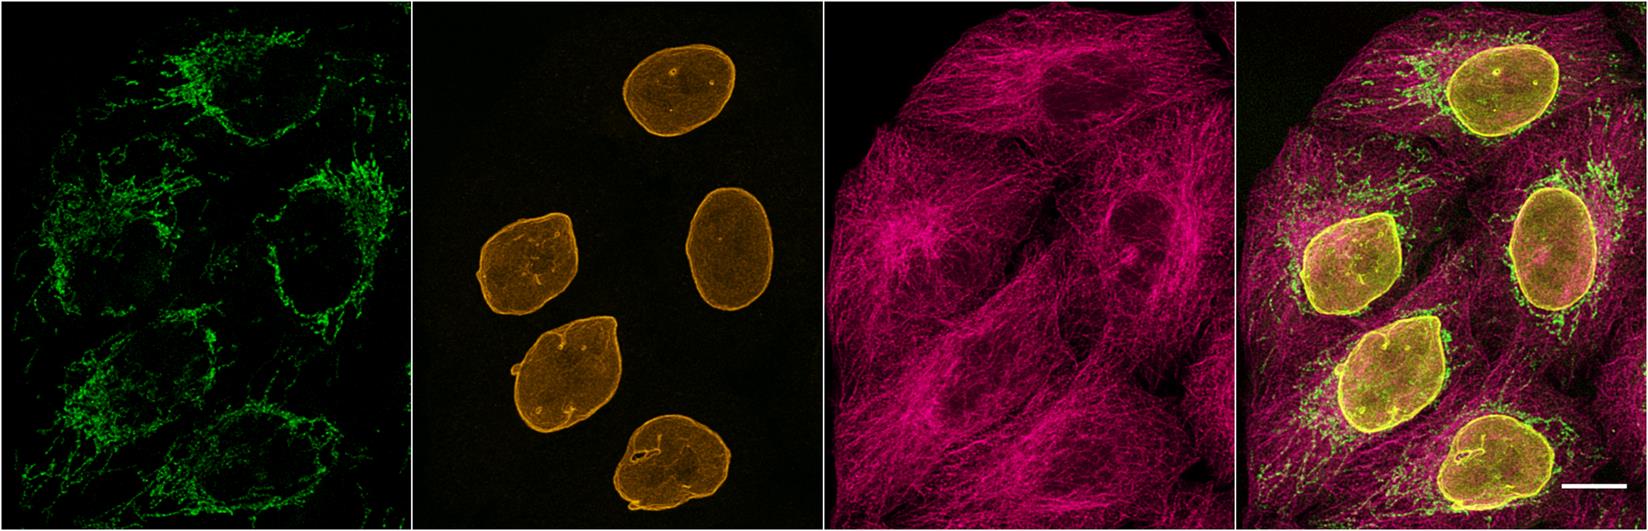 Multiplexed immunostaining of HeLa cells with two alpaca anti-mouse Nano-Secondaries and one anti-rabbit Nano-Secondary. Green: mouse IgG1 anti-COX4 + alpaca anti-mouse IgG1 VHH Alexa Fluor® 488. Yellow: rabbit anti-Lamin + alpaca anti-rabbit IgG VHH Alexa Fluor® 568. Magenta: mouse IgG2b anti-Tubulin + alpaca anti-mouse IgG2b VHH Alexa Fluor® 647. Scale bar, 10 μm. Images were recorded at the Core Facility Bioimaging at the Biomedical Center, LMU Munich.